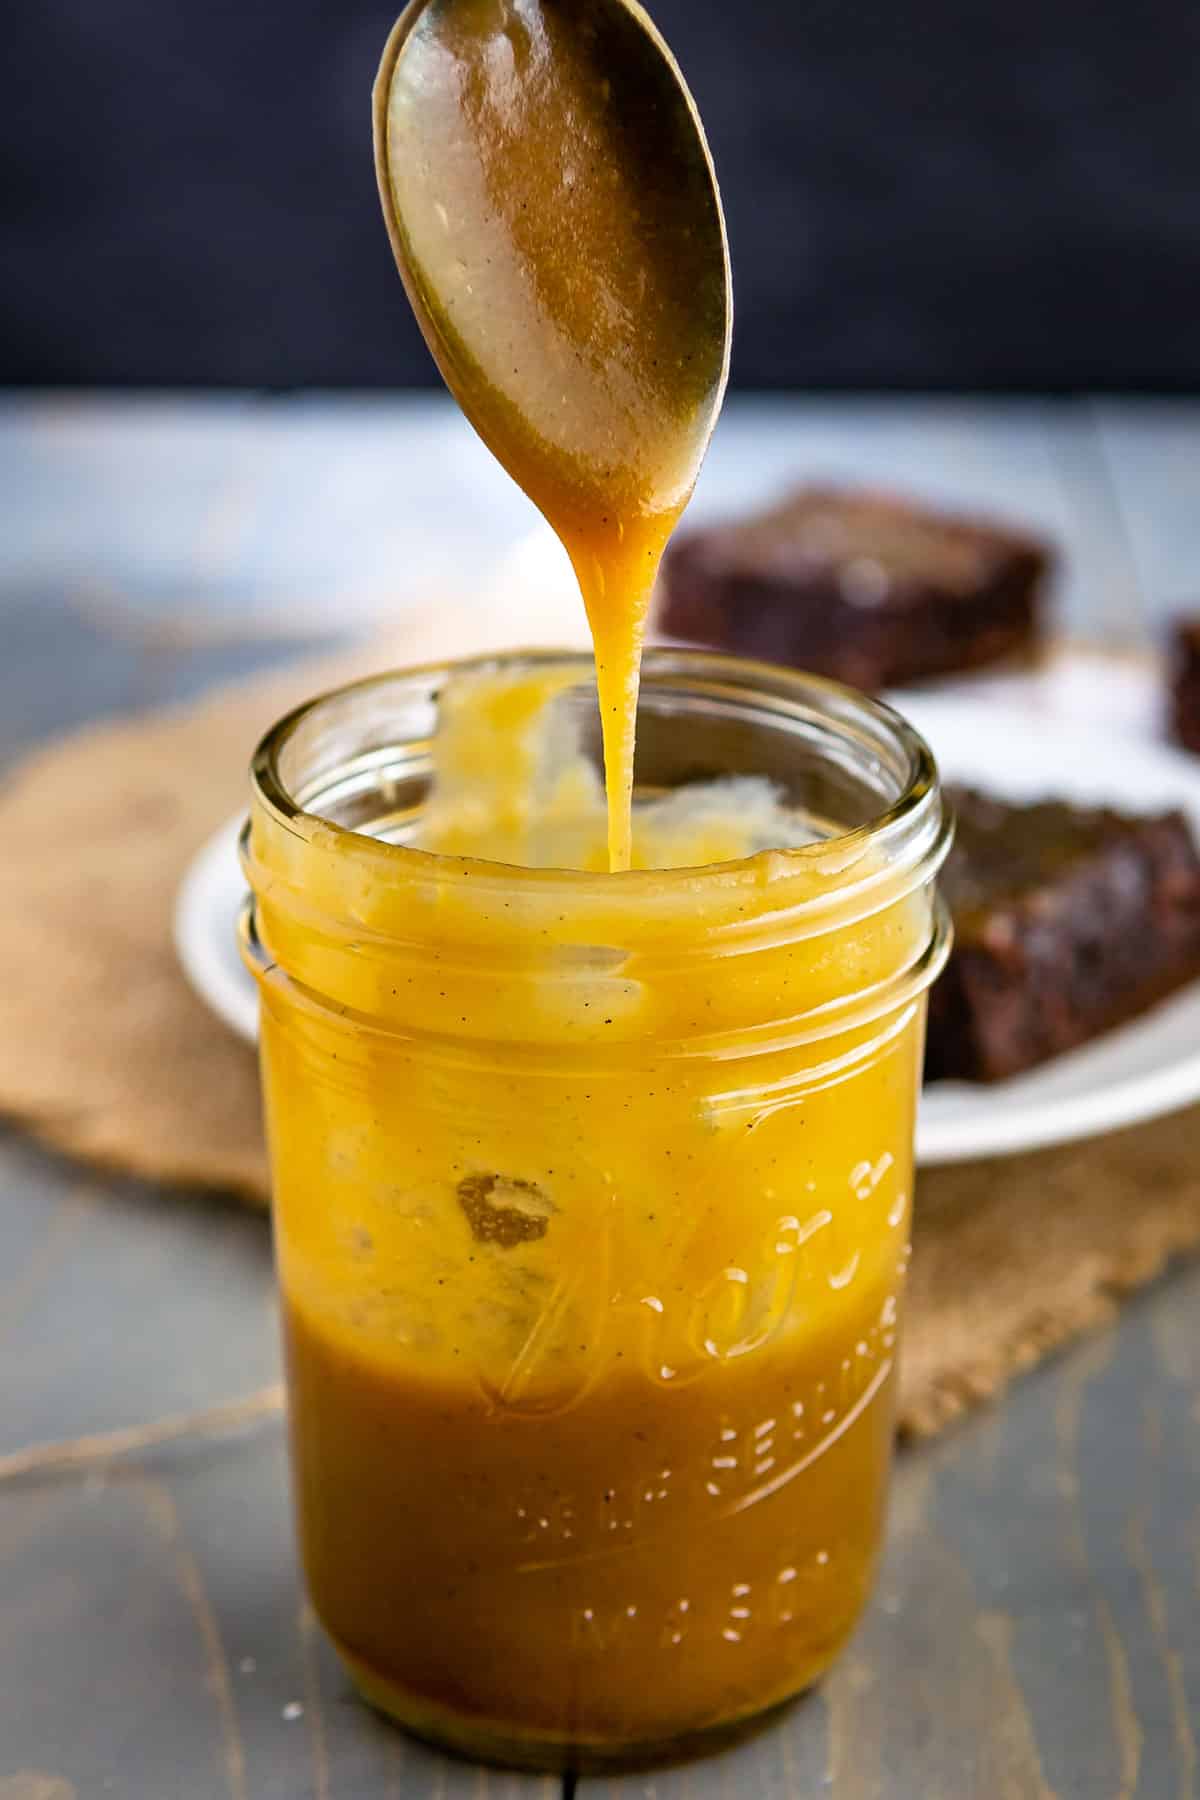 caramel in a mason jar being poured with a spoon